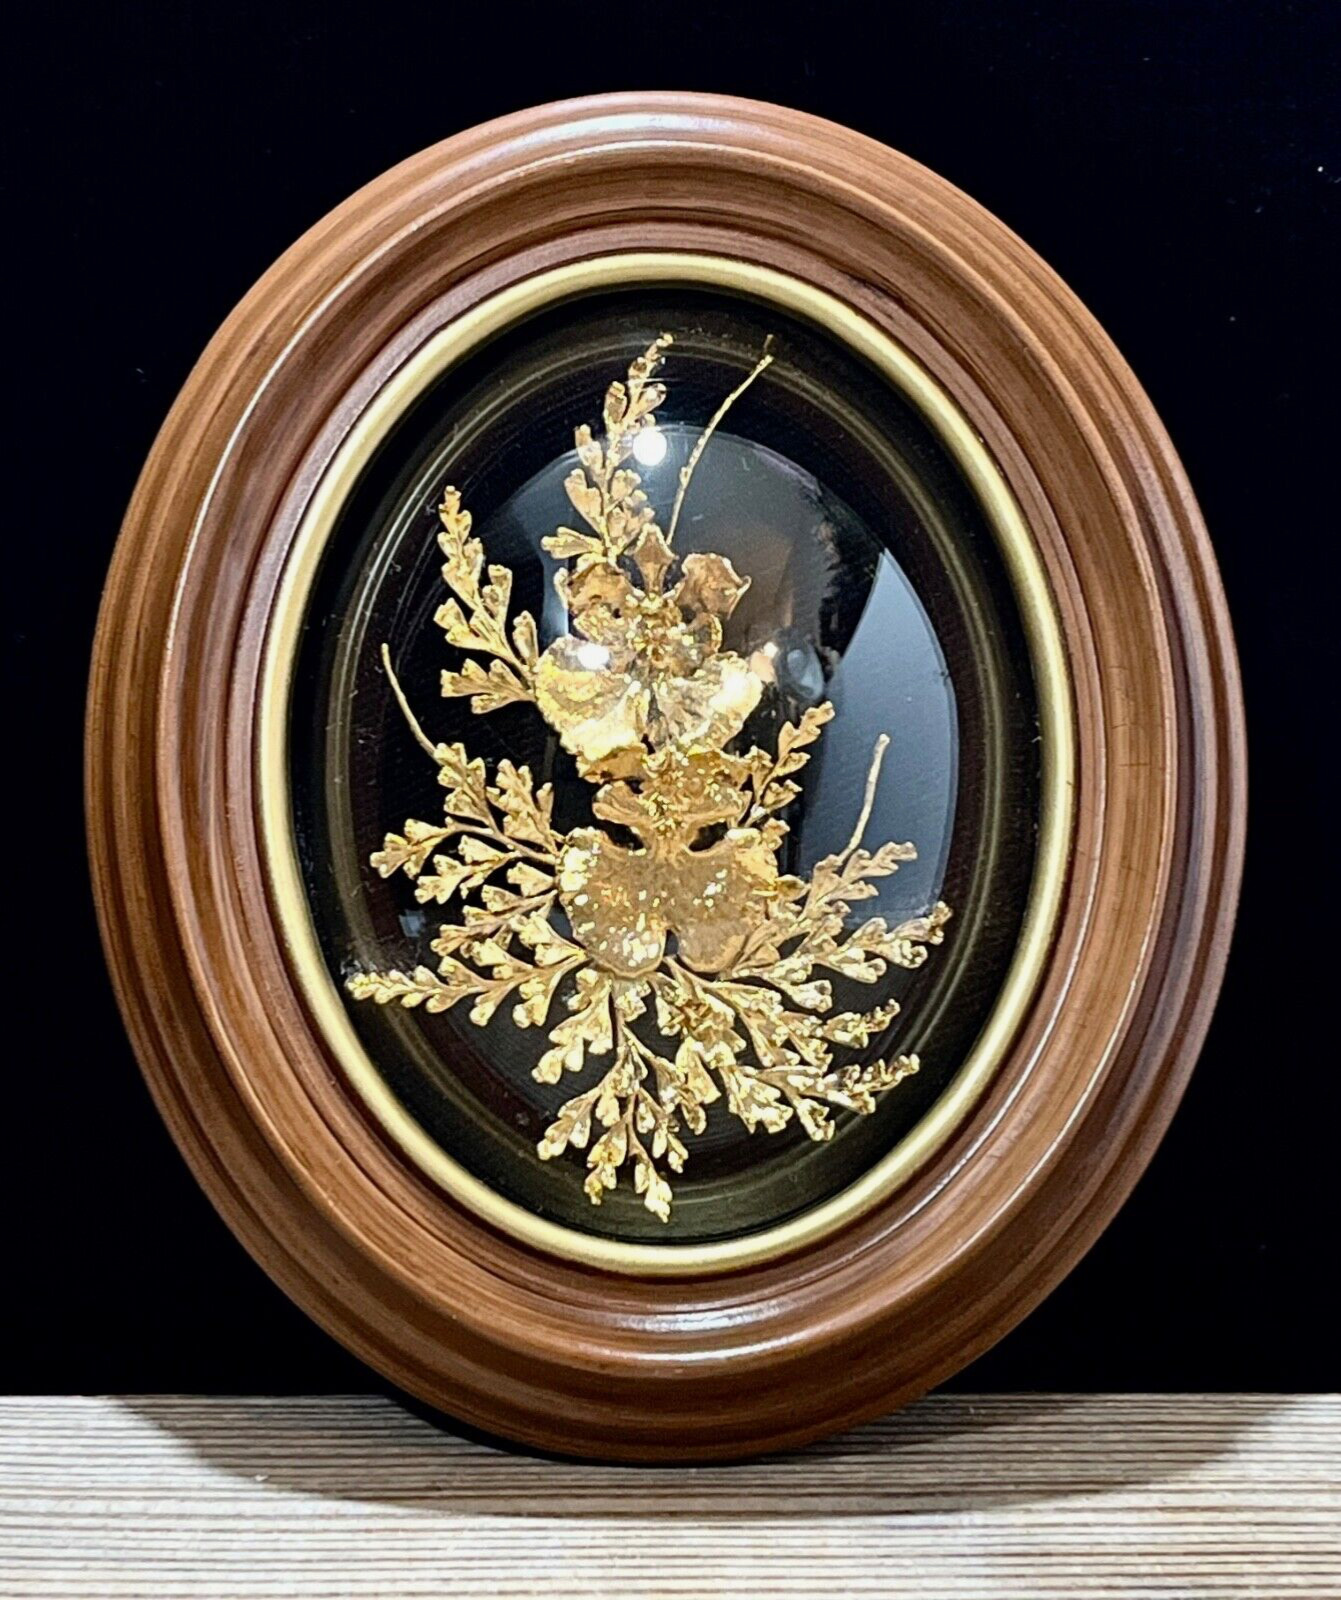 Real Hawaiian Flowers And Leaves 24k Gold Picture Handcrafted In Maui Hawaii